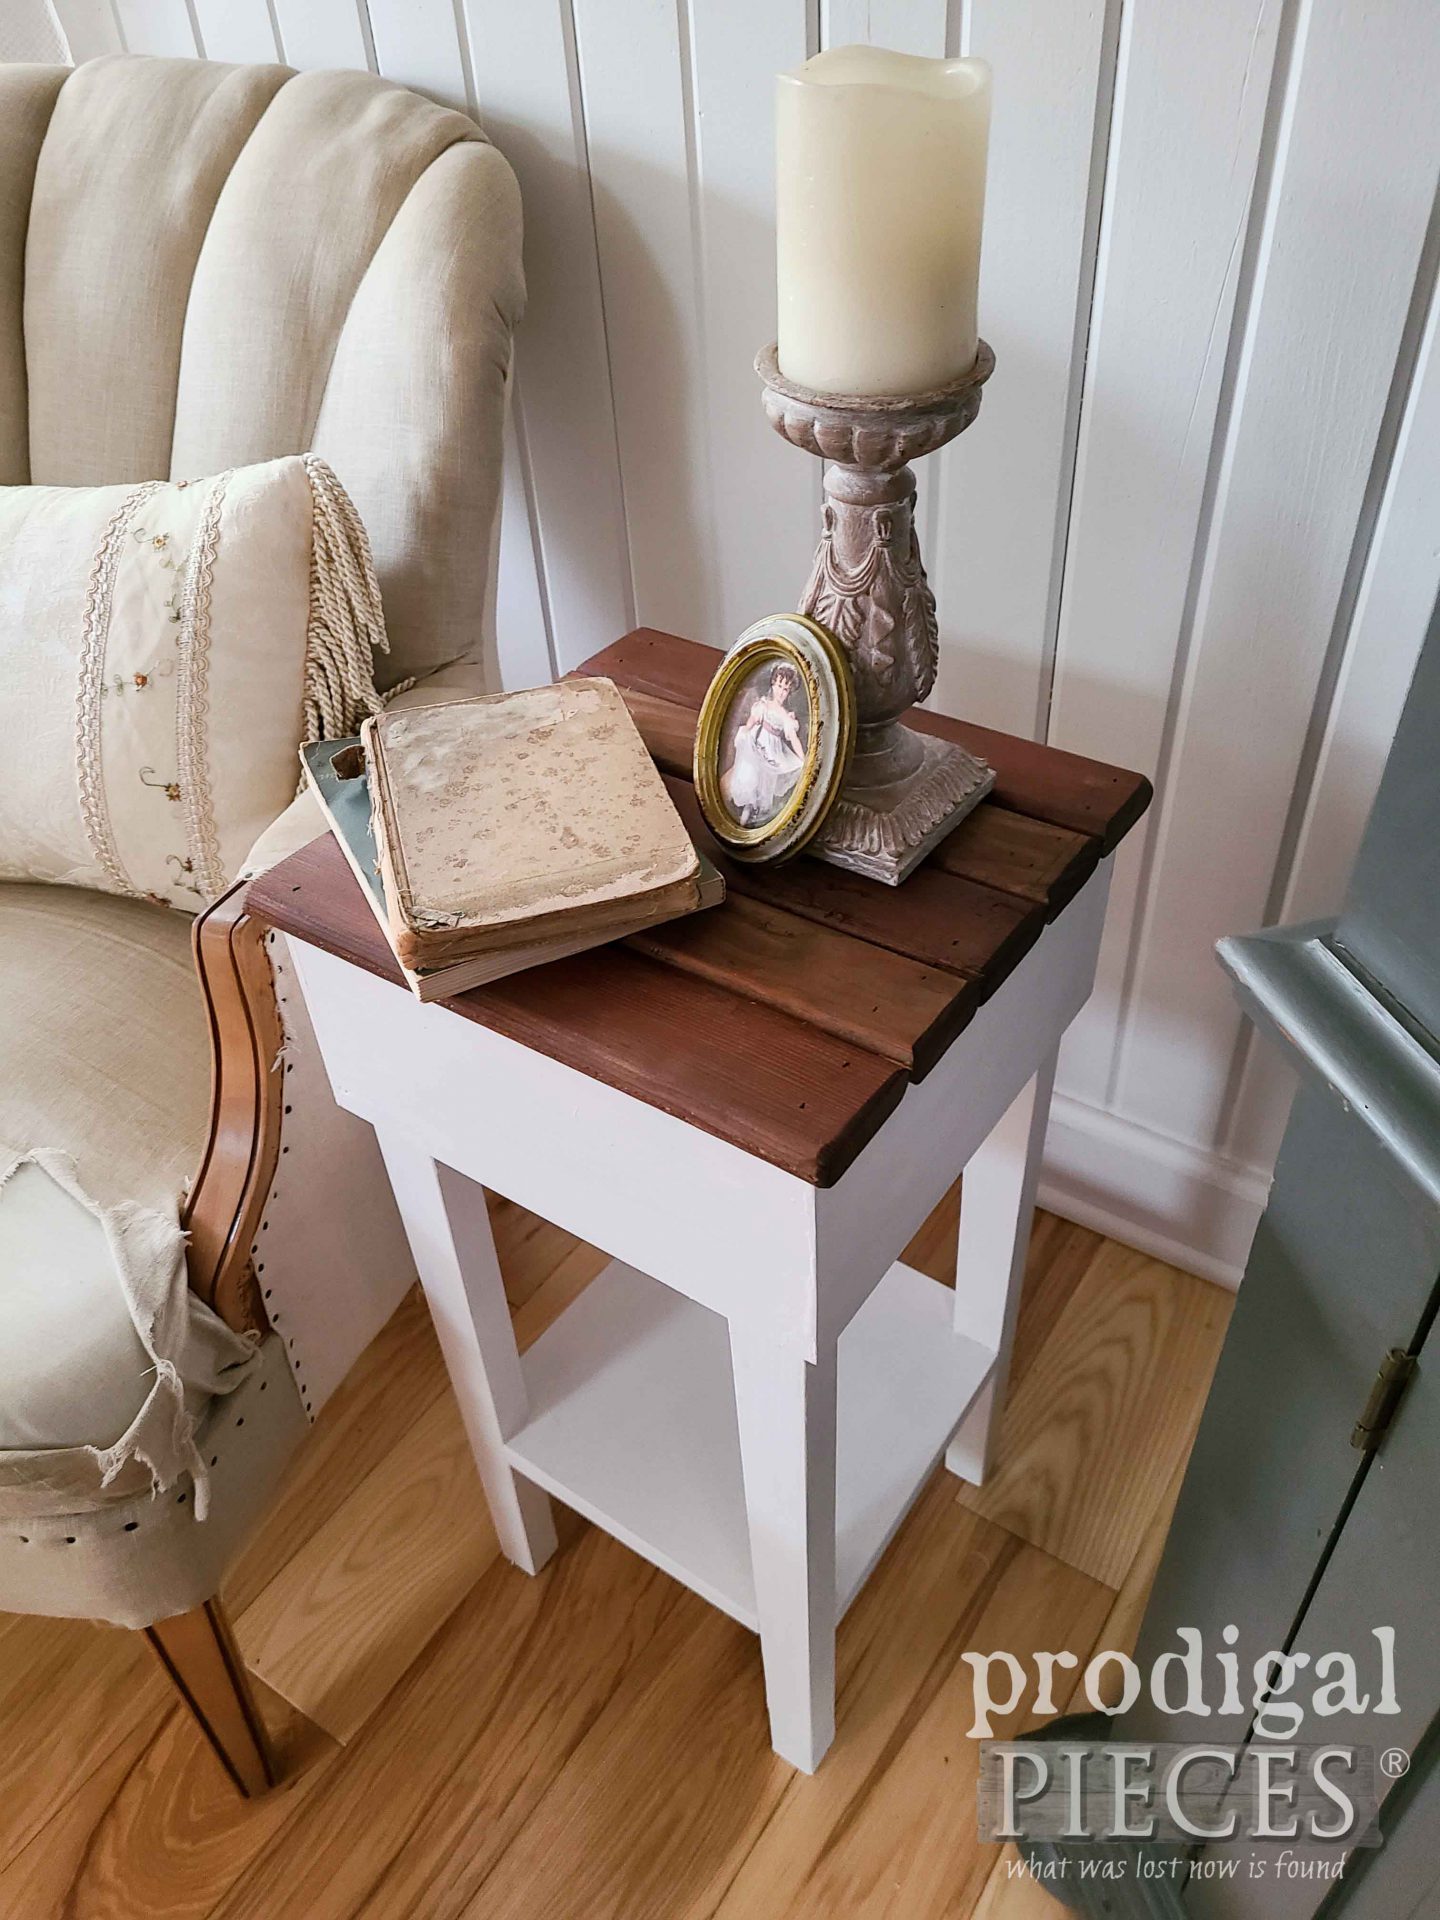 Planked Top Farmhouse Side Table by Prodigal Pieces Kids CREATE | prodigalpieces.com #prodigalpieces #farmhoiuse #furniture #kids